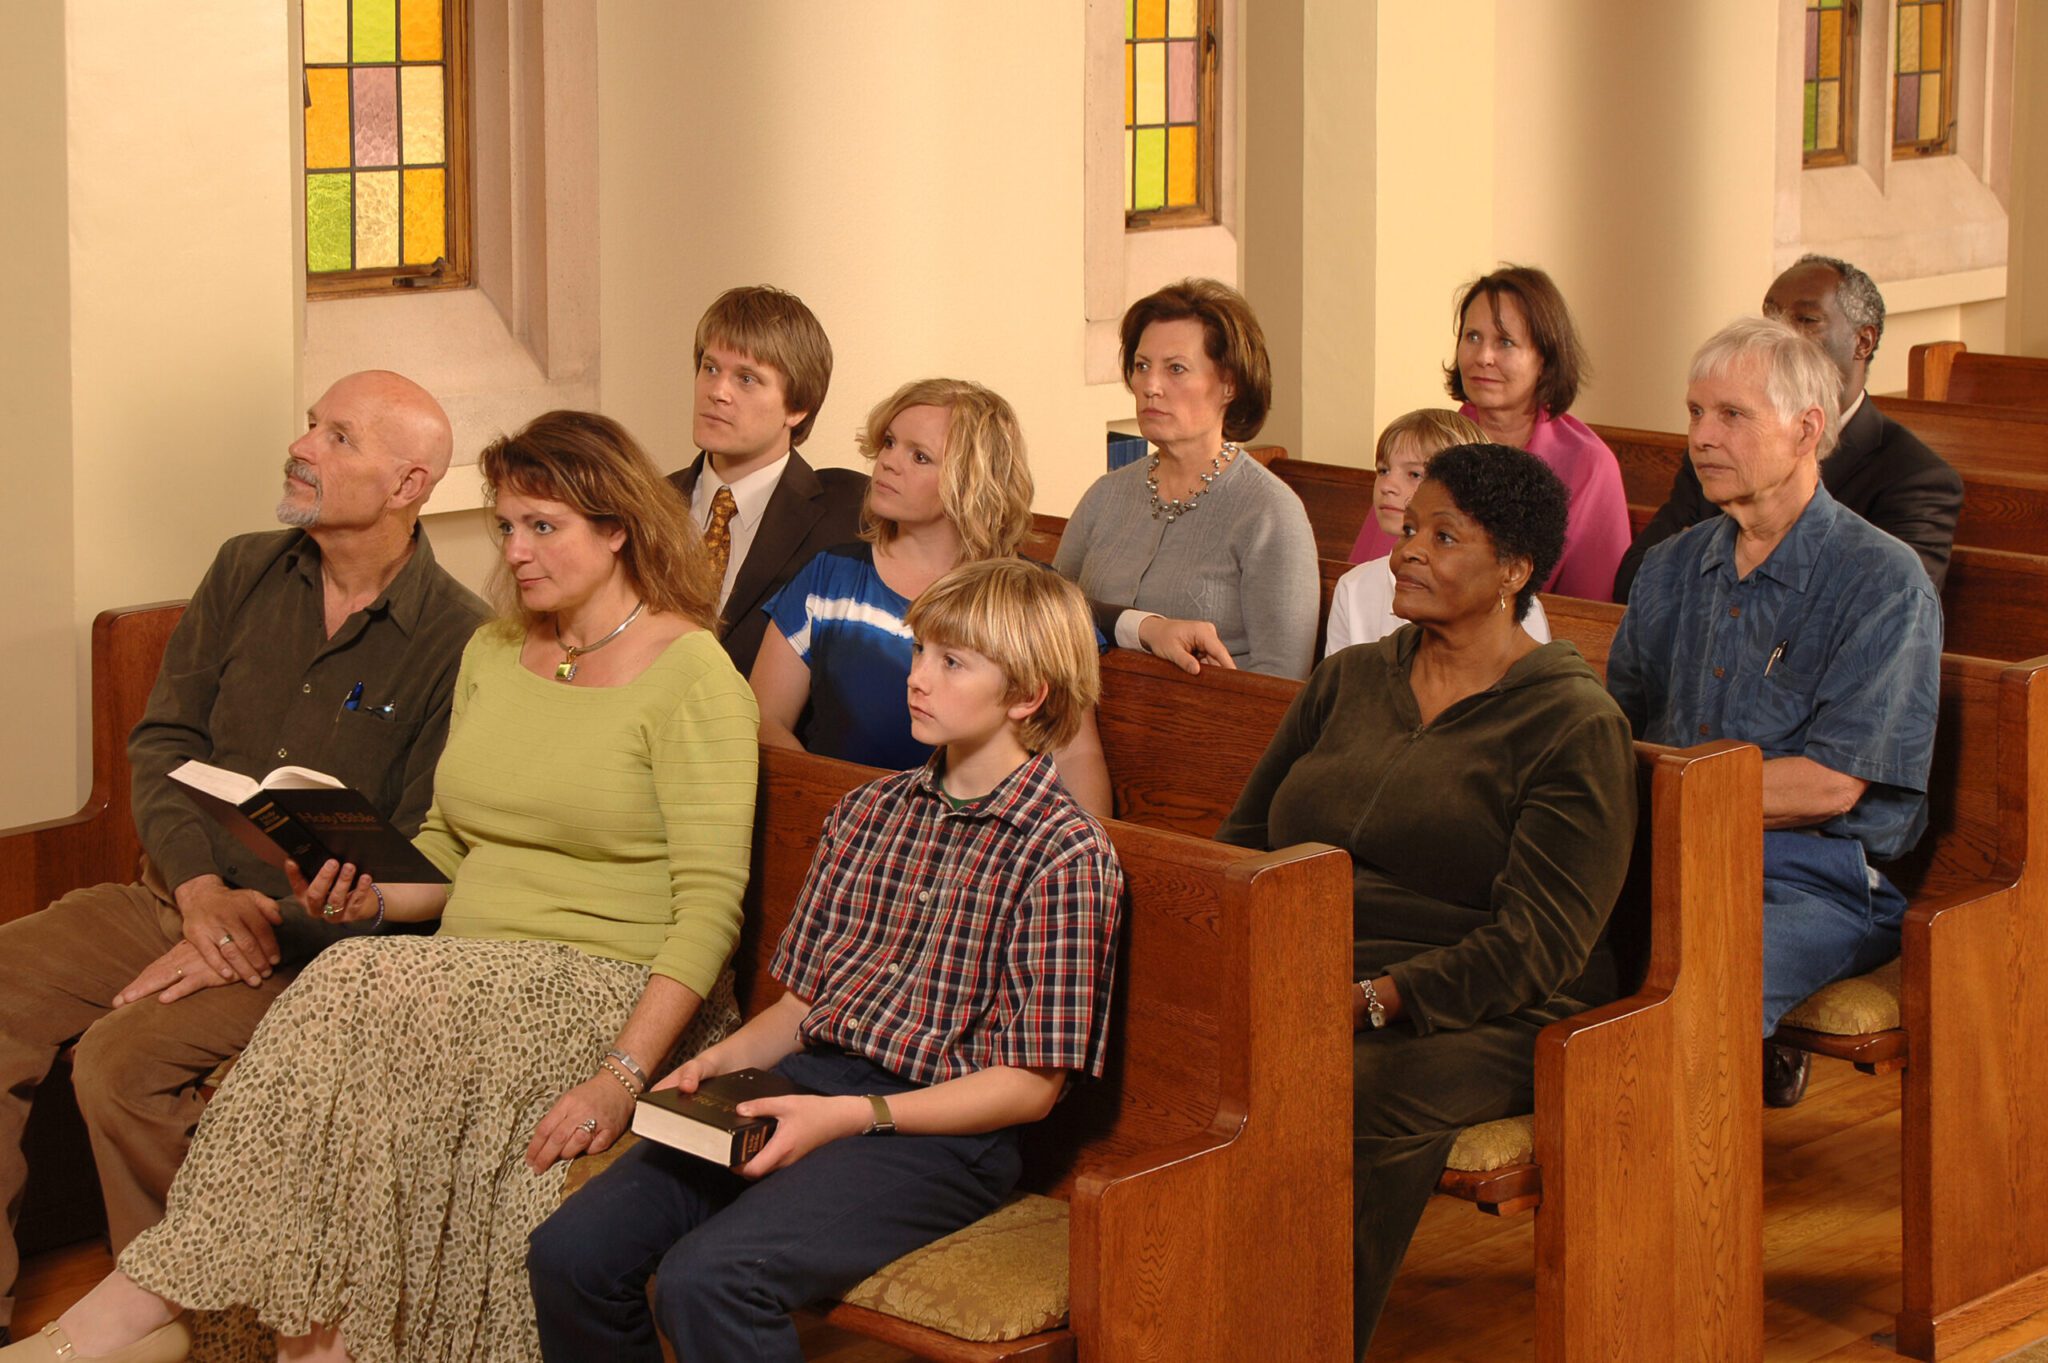 A congregation sitting in church pews, looking uncomfortable.